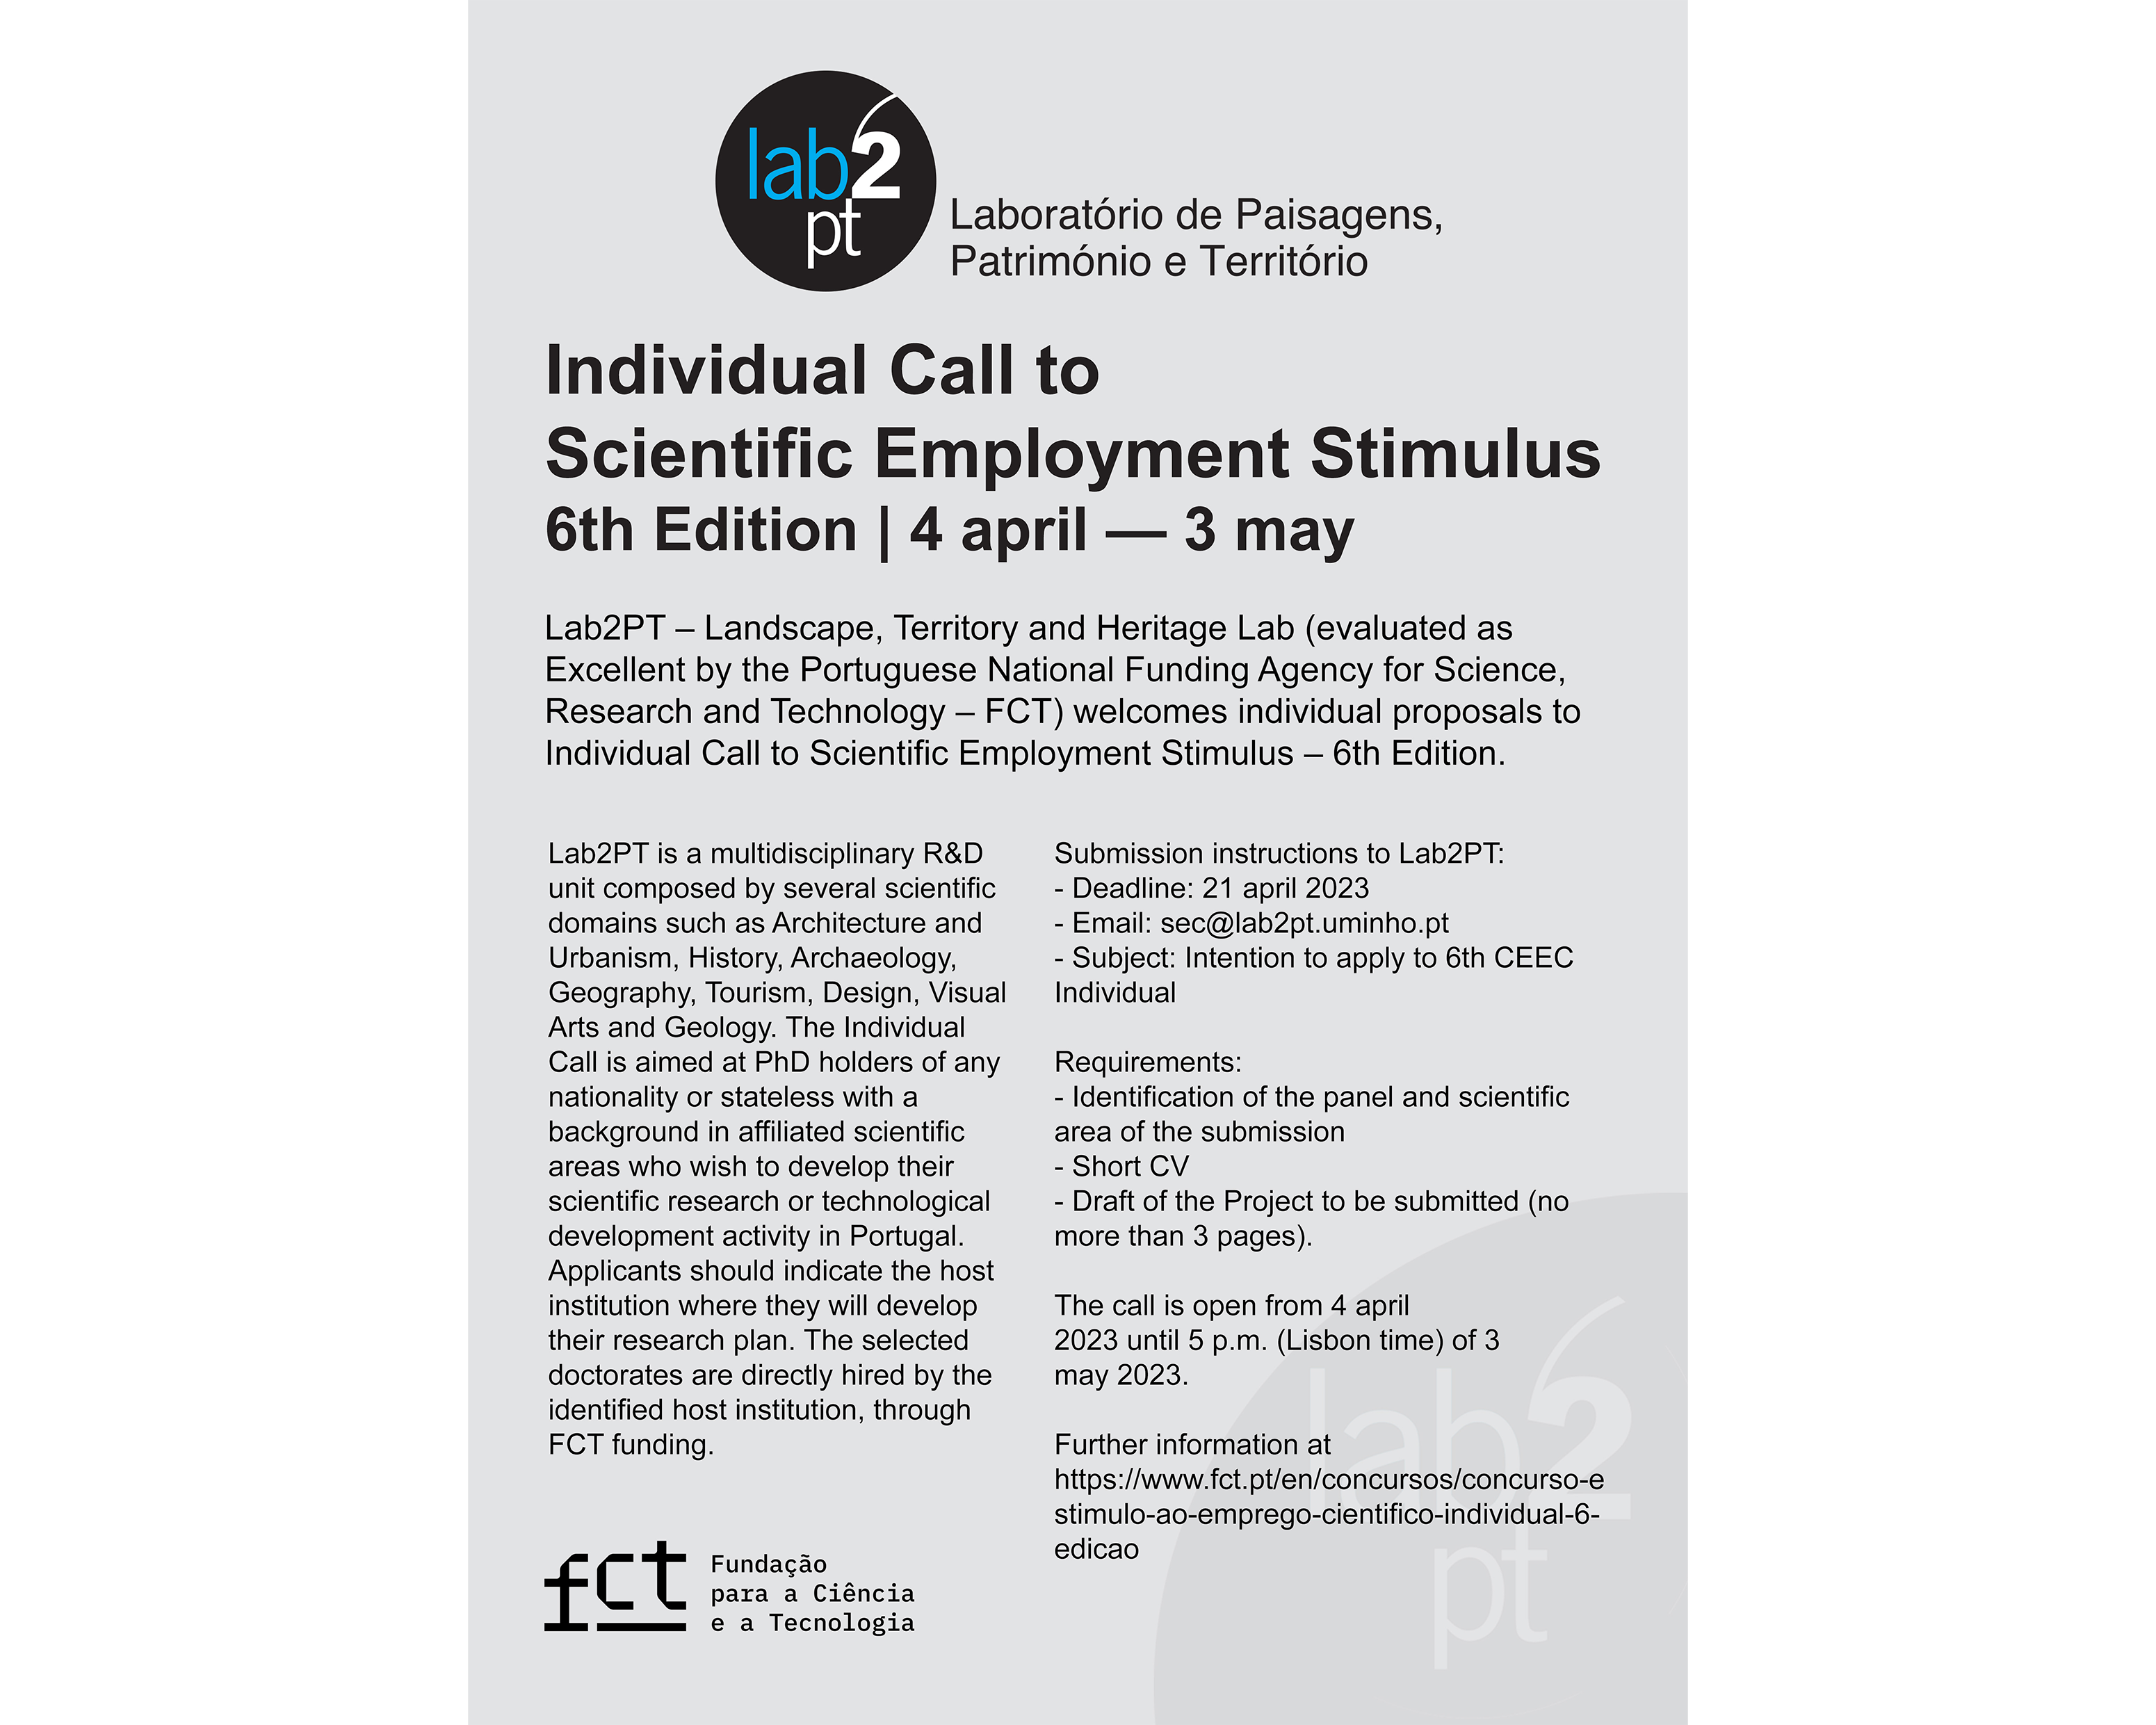 Lab2PT welcomes individual proposals to Individual Call to Scientific Employment Stimulus – 6th Edition image